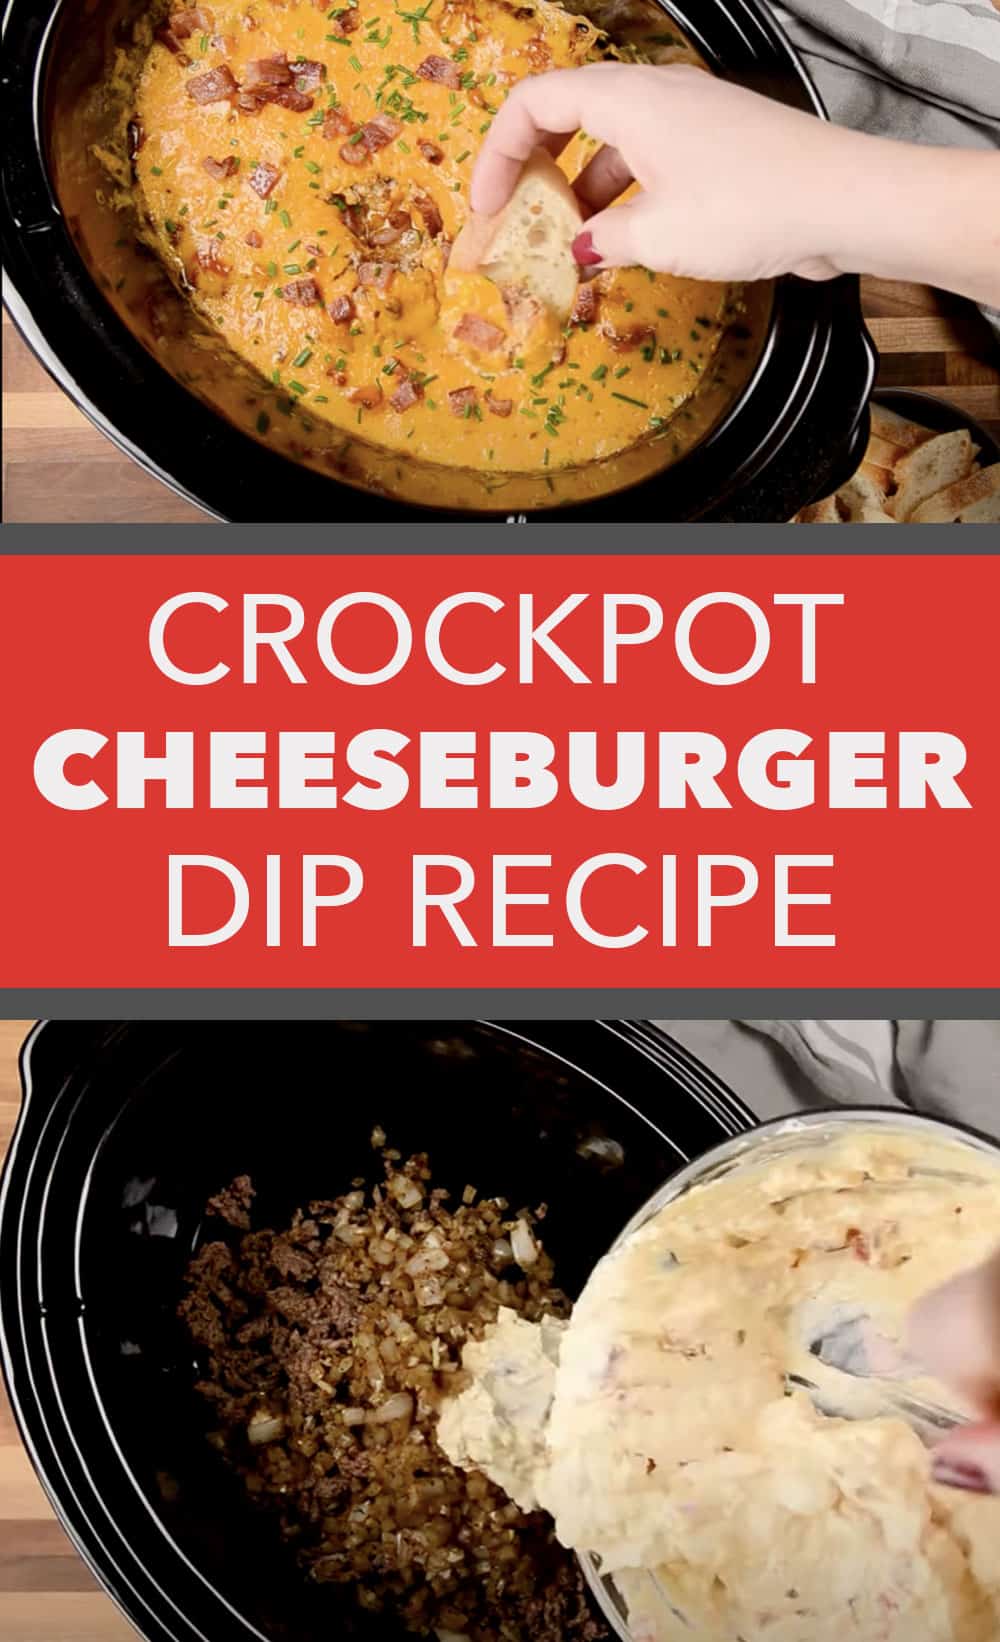 Crockpot Recipes for A Potluck - Easy Bacon Cheeseburger Dip Recipe and Tutorial - Ground Beef Recipes for Appetizers